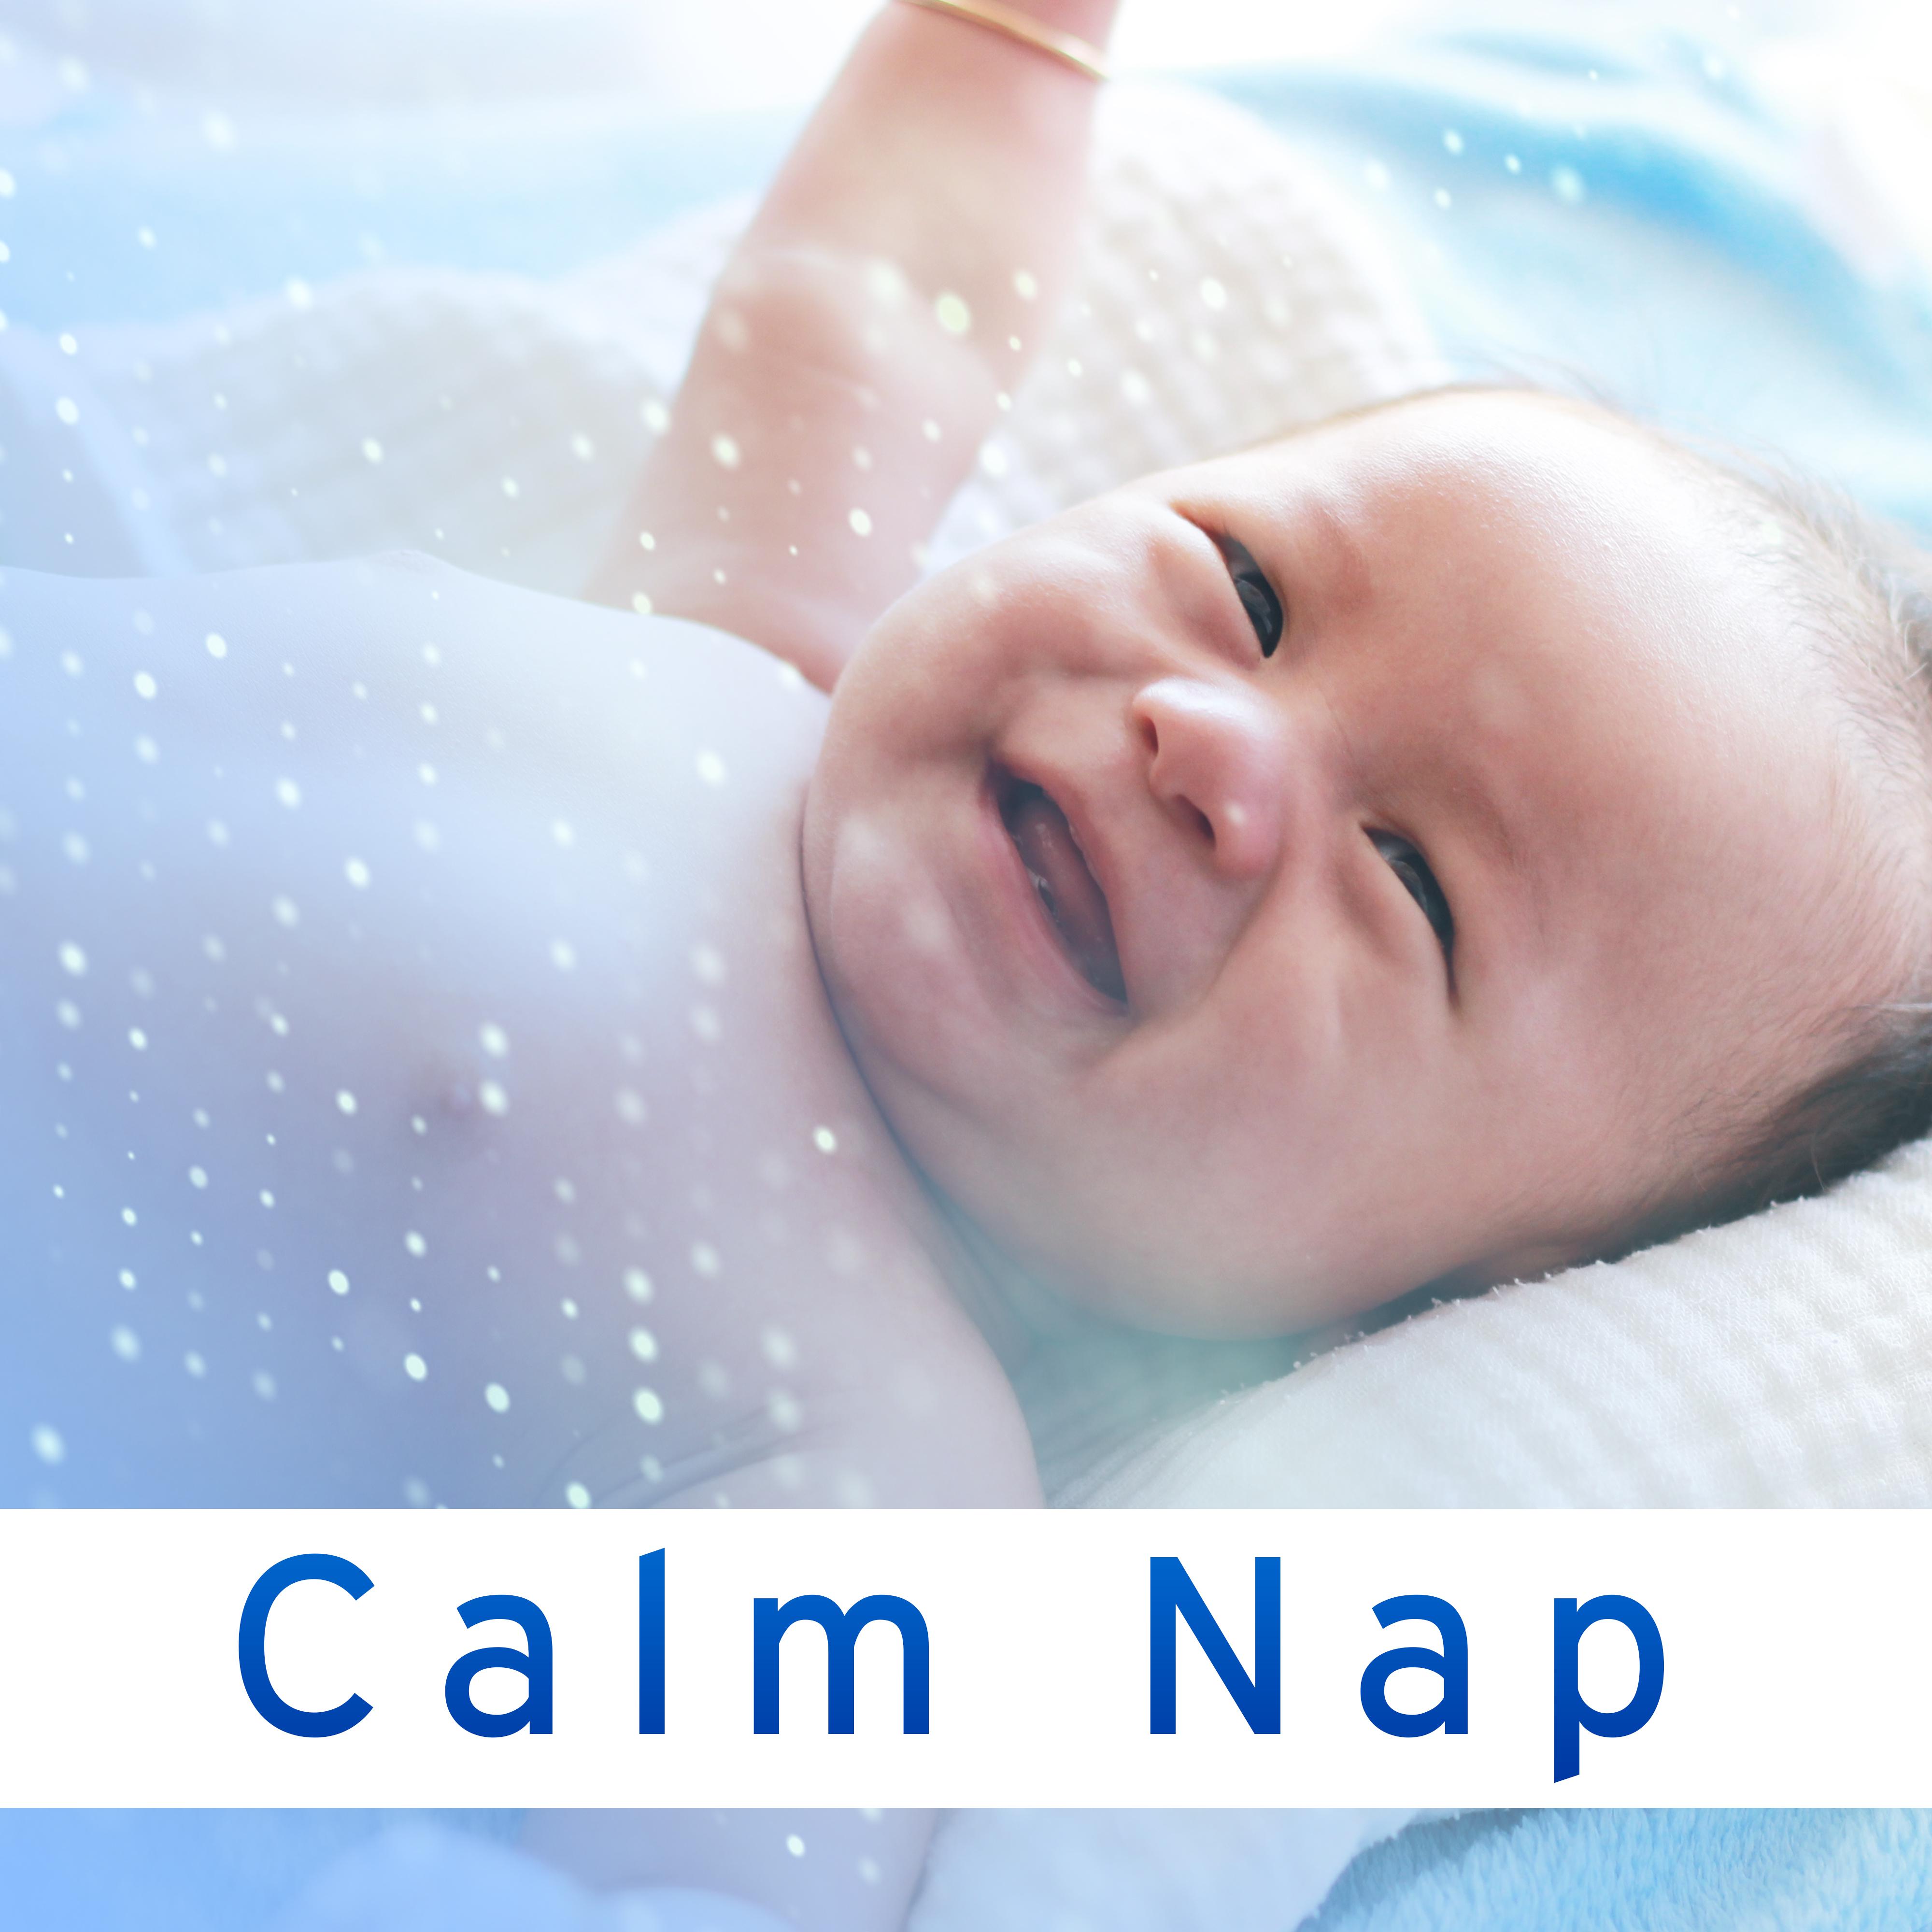 Calm Nap  Peaceful Music for Baby, Healing Lullabies, Pure Sleep, Sweet Dreams, Calm Night, Melodies to Bed